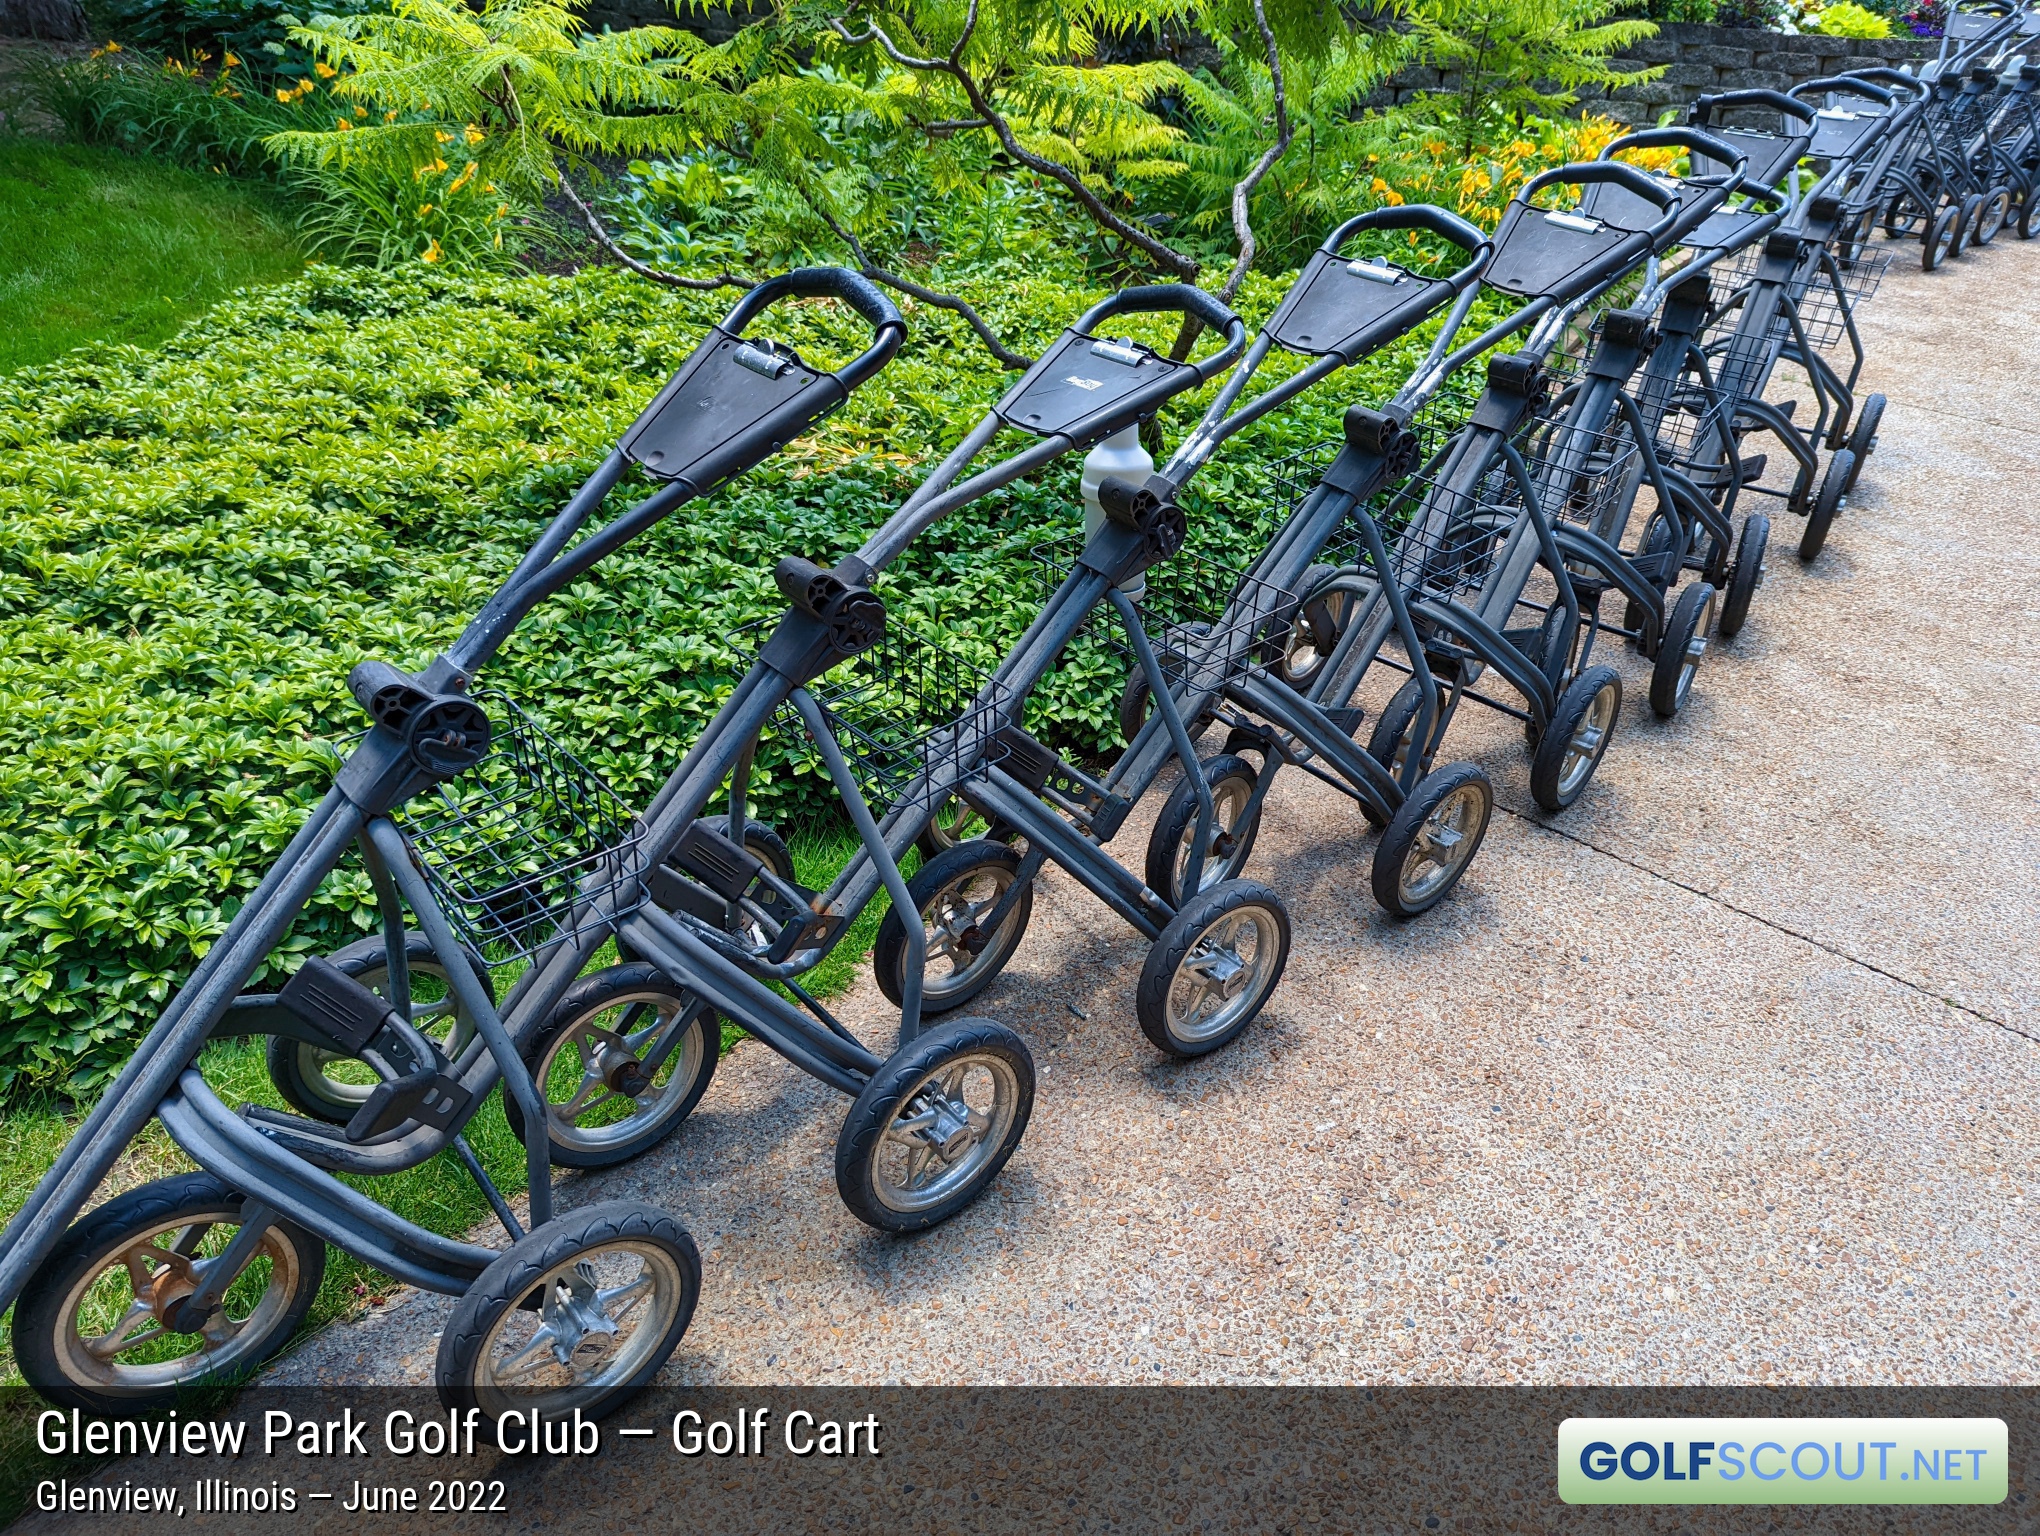 Photo of the golf carts at Glenview Park Golf Club in Glenview, Illinois. 